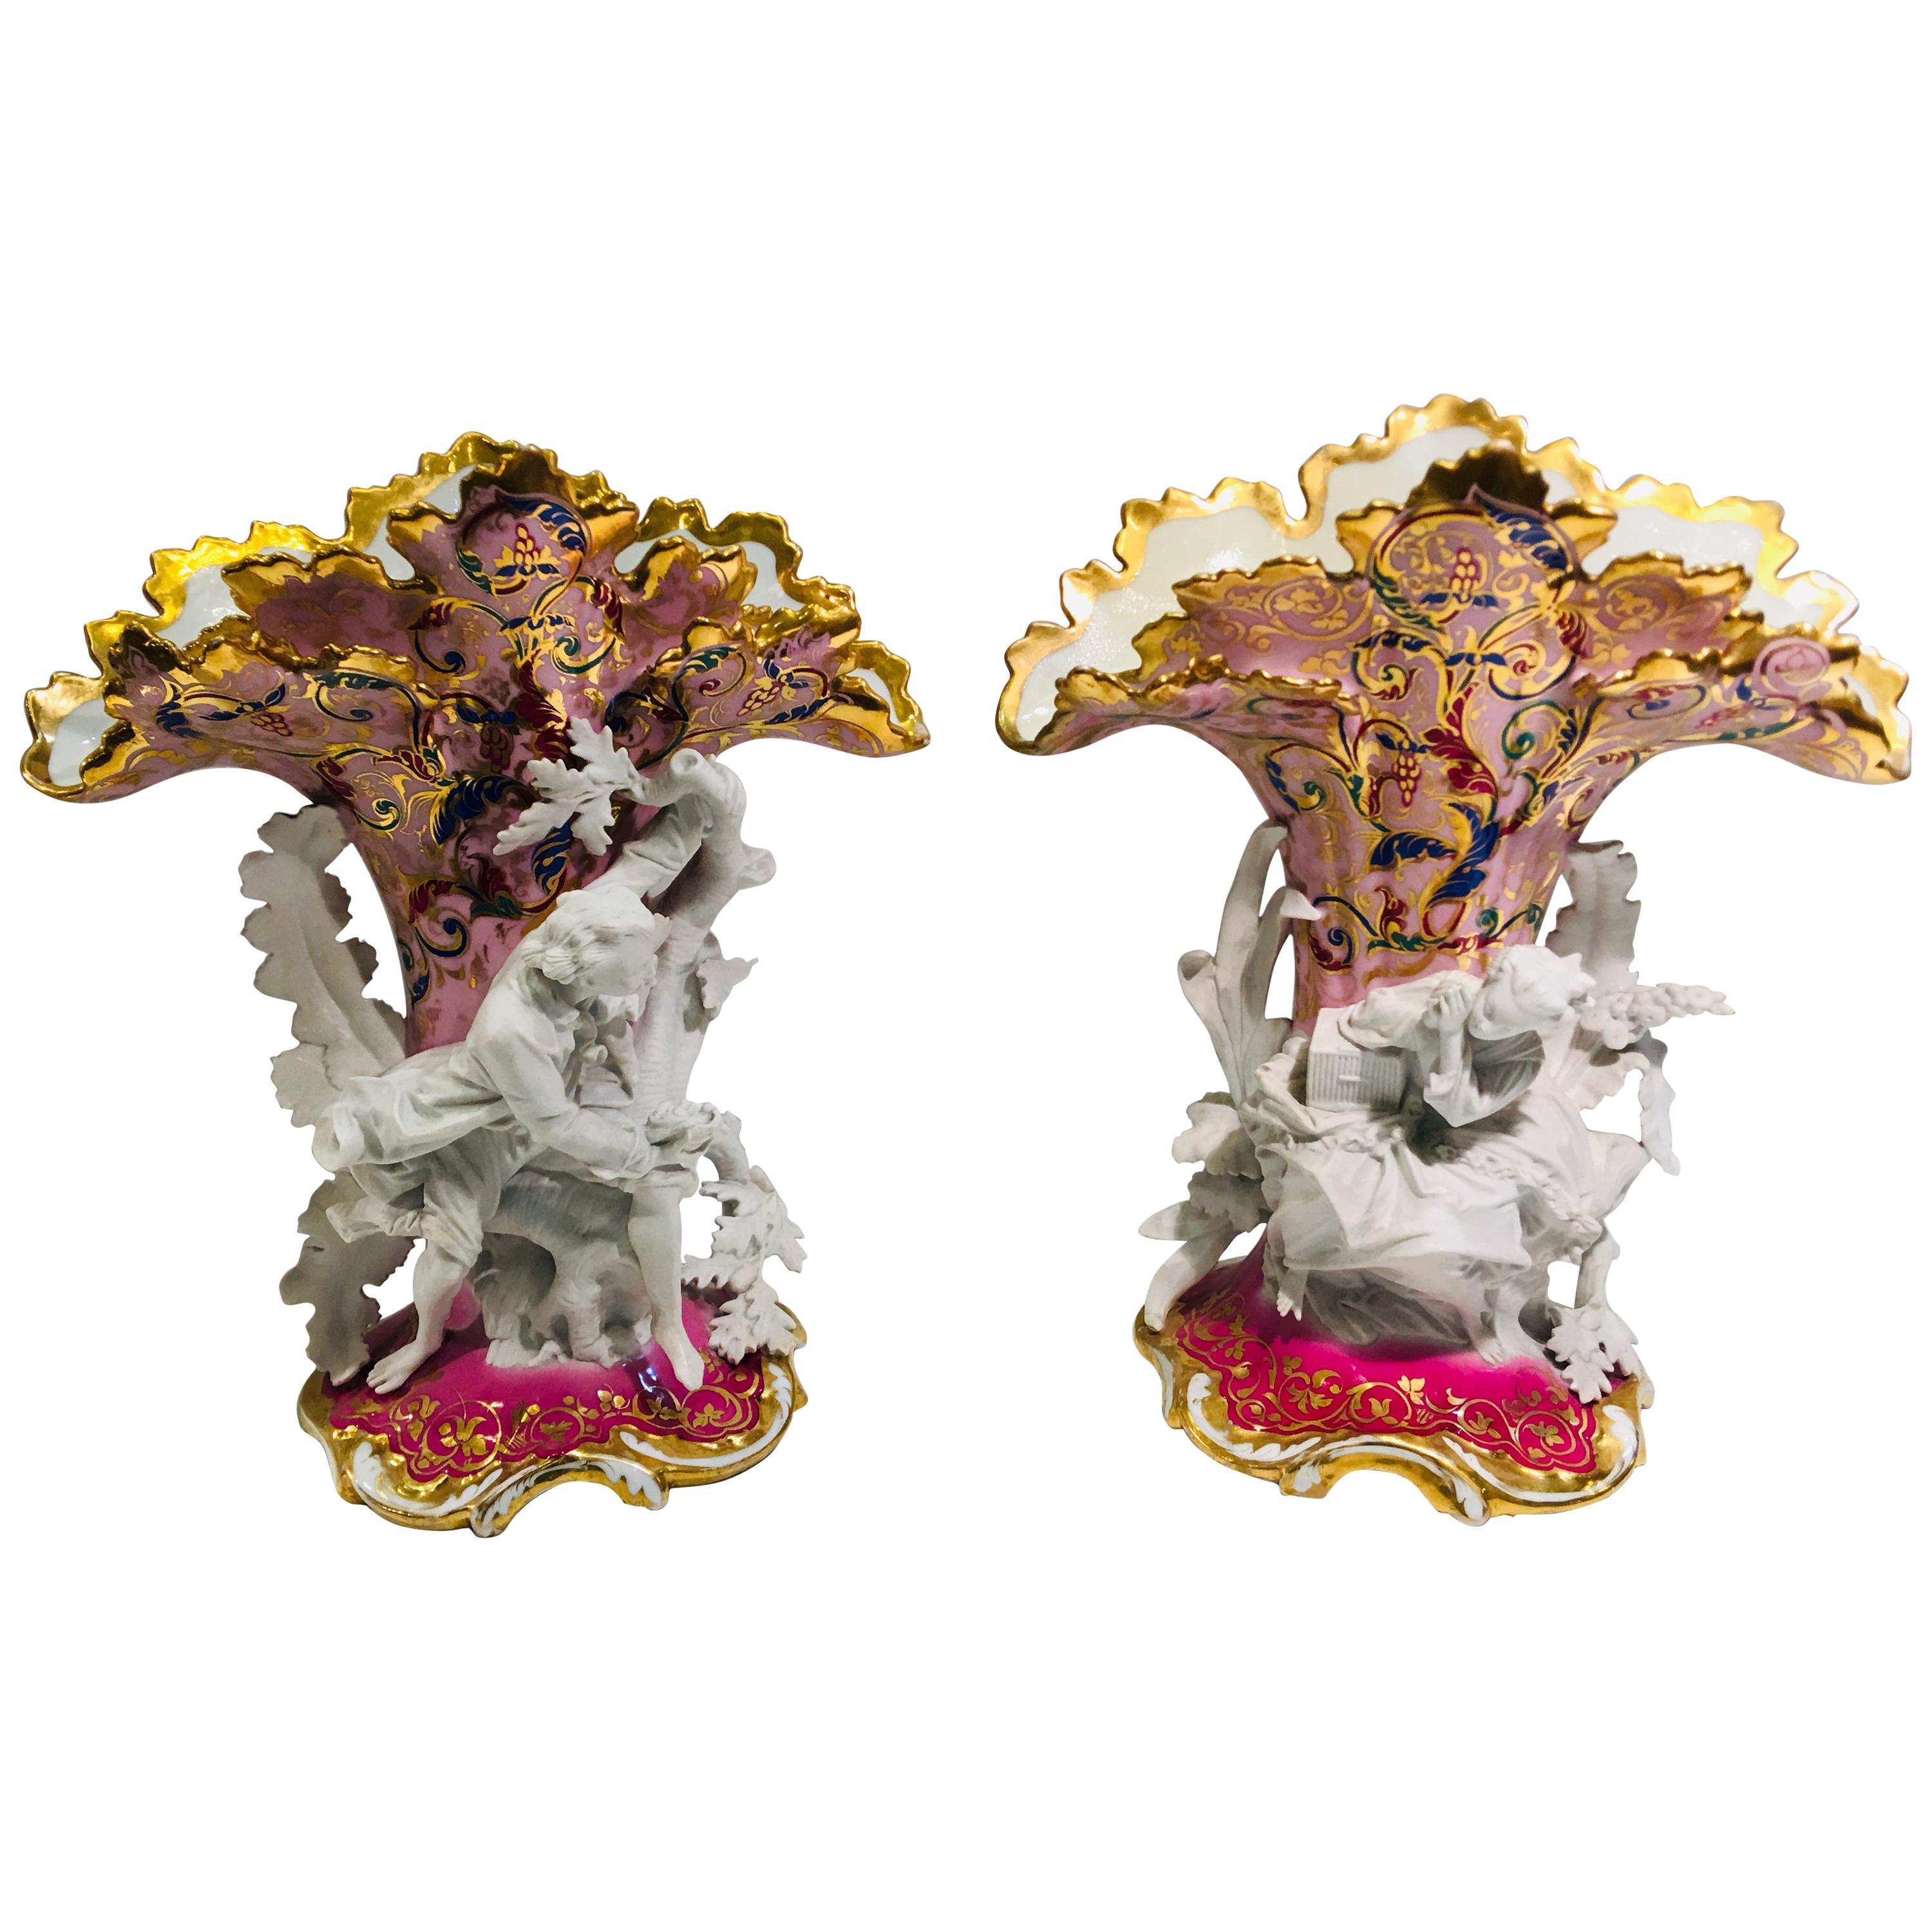 Elaborate Pair of French Old Paris Antique Porcelain and Bisque Rococo Vases For Sale